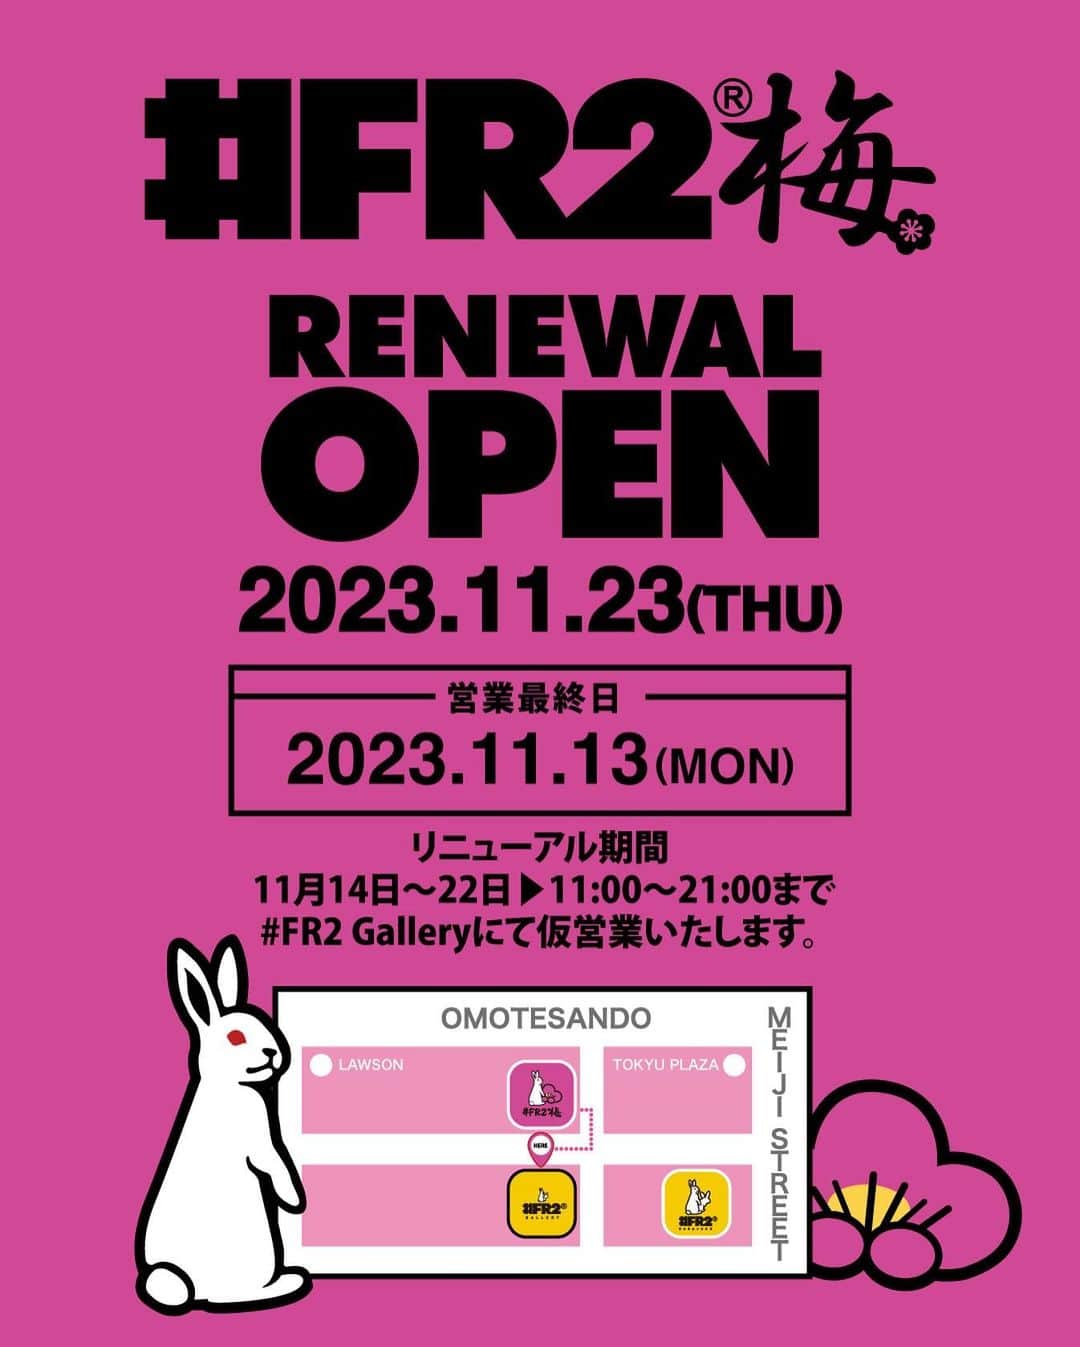 #FR2梅(UME)のインスタグラム：「#FR2 UME 2023.11.23 (Thu) "RENEWAL OPEN" Thank you for your patronage of #FR2 UME. Our store will be having a renewal opening on Thursday, 23rd November, 2023. We apologize for the inconvenience during the period of our renovation works. Please look forward to the new #FR2 UME. During the period of renovation works prior to the renewal, we will temporarily be operating at our #FR2 Gallery location. #FR2 Gallery November 14th - November 22nd 1F, 4-28-16 Jingumae, Shibuya-ku, Tokyo Business hours: 11:00 - 21:00 #FR2 UME 2023.11.23 (thu) "RENEWAL OPEN" いつも #FR2梅 をご愛顧いただき、誠にありがとうございます。 店は、2023年11月23日（木）にリニューアルオープンいたします。 オープンまでの期間中、お客様にはご迷惑をお掛けいたしますが 新しく生まれ変わる、#FR2梅 にご期待ください。 リニューアル期間 #FR2Gallery にて仮営業いたします。 #FR2 Gallery 11月14日 - 11月22日 東京都渋谷区神宮前4-28-16 1F 営業時間：11:00 - 21:00」